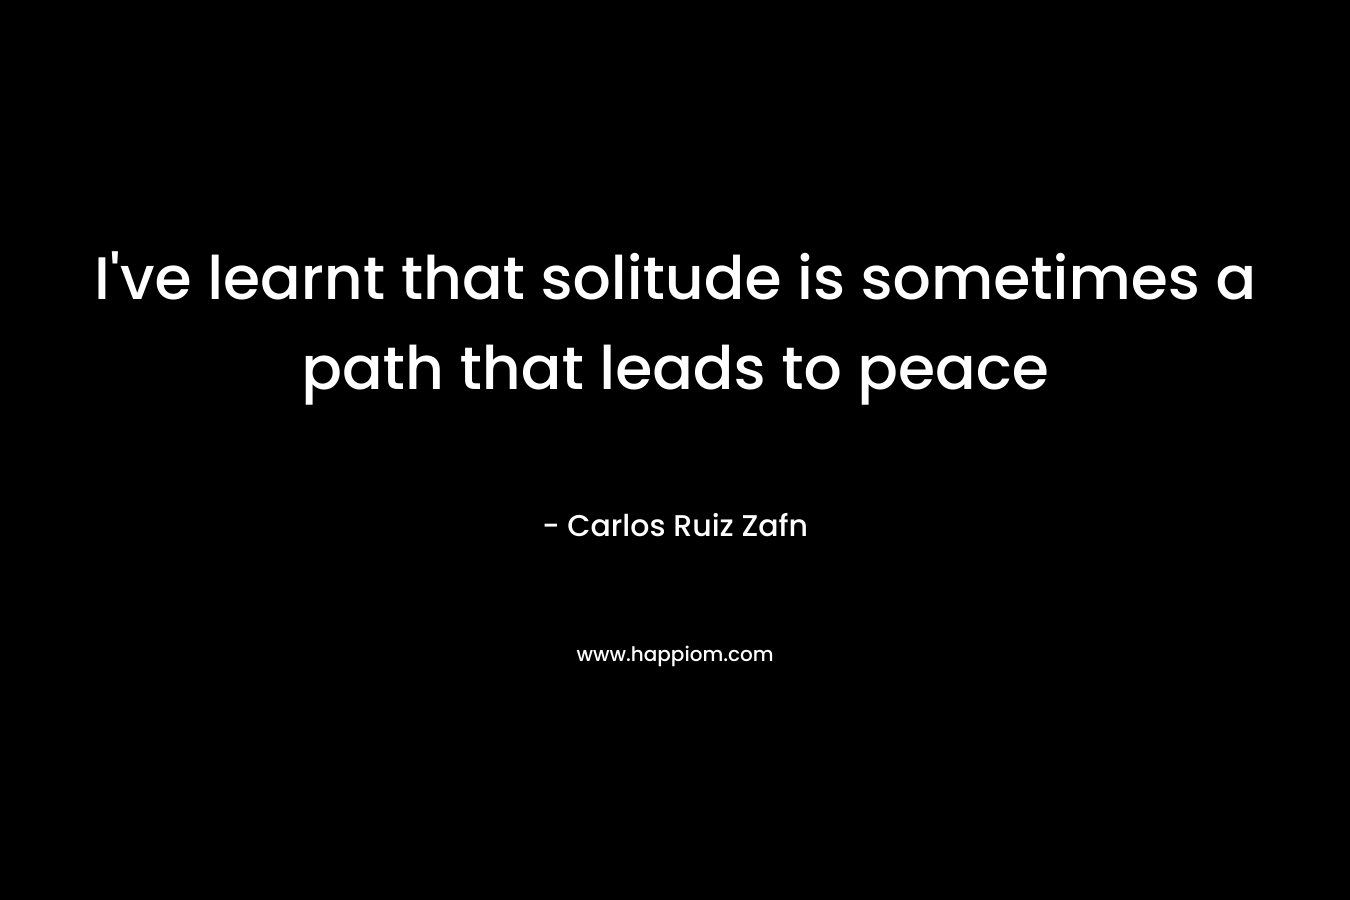 I’ve learnt that solitude is sometimes a path that leads to peace – Carlos Ruiz Zafn